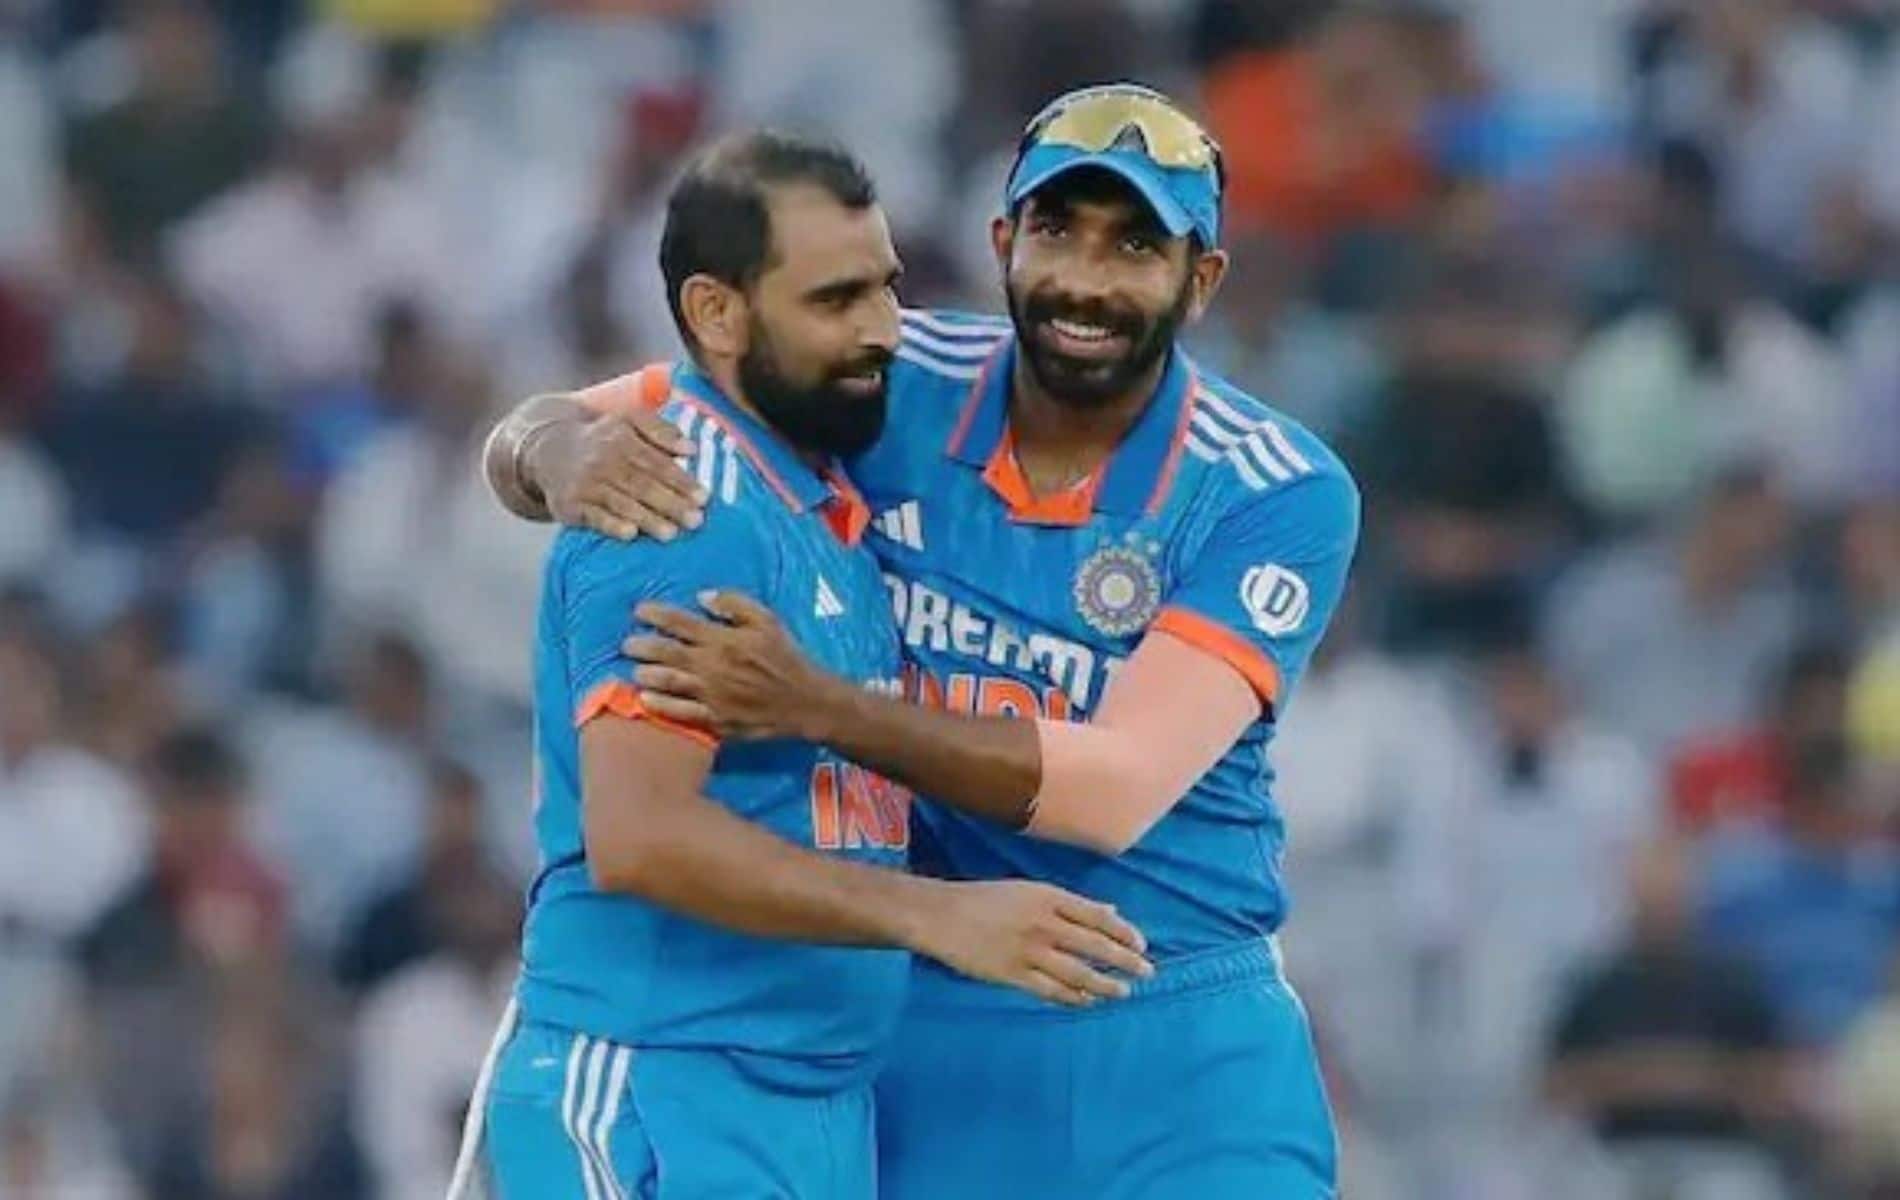  'Injuries Don't Define...': Shami's Motivational Words After Successful Surgery